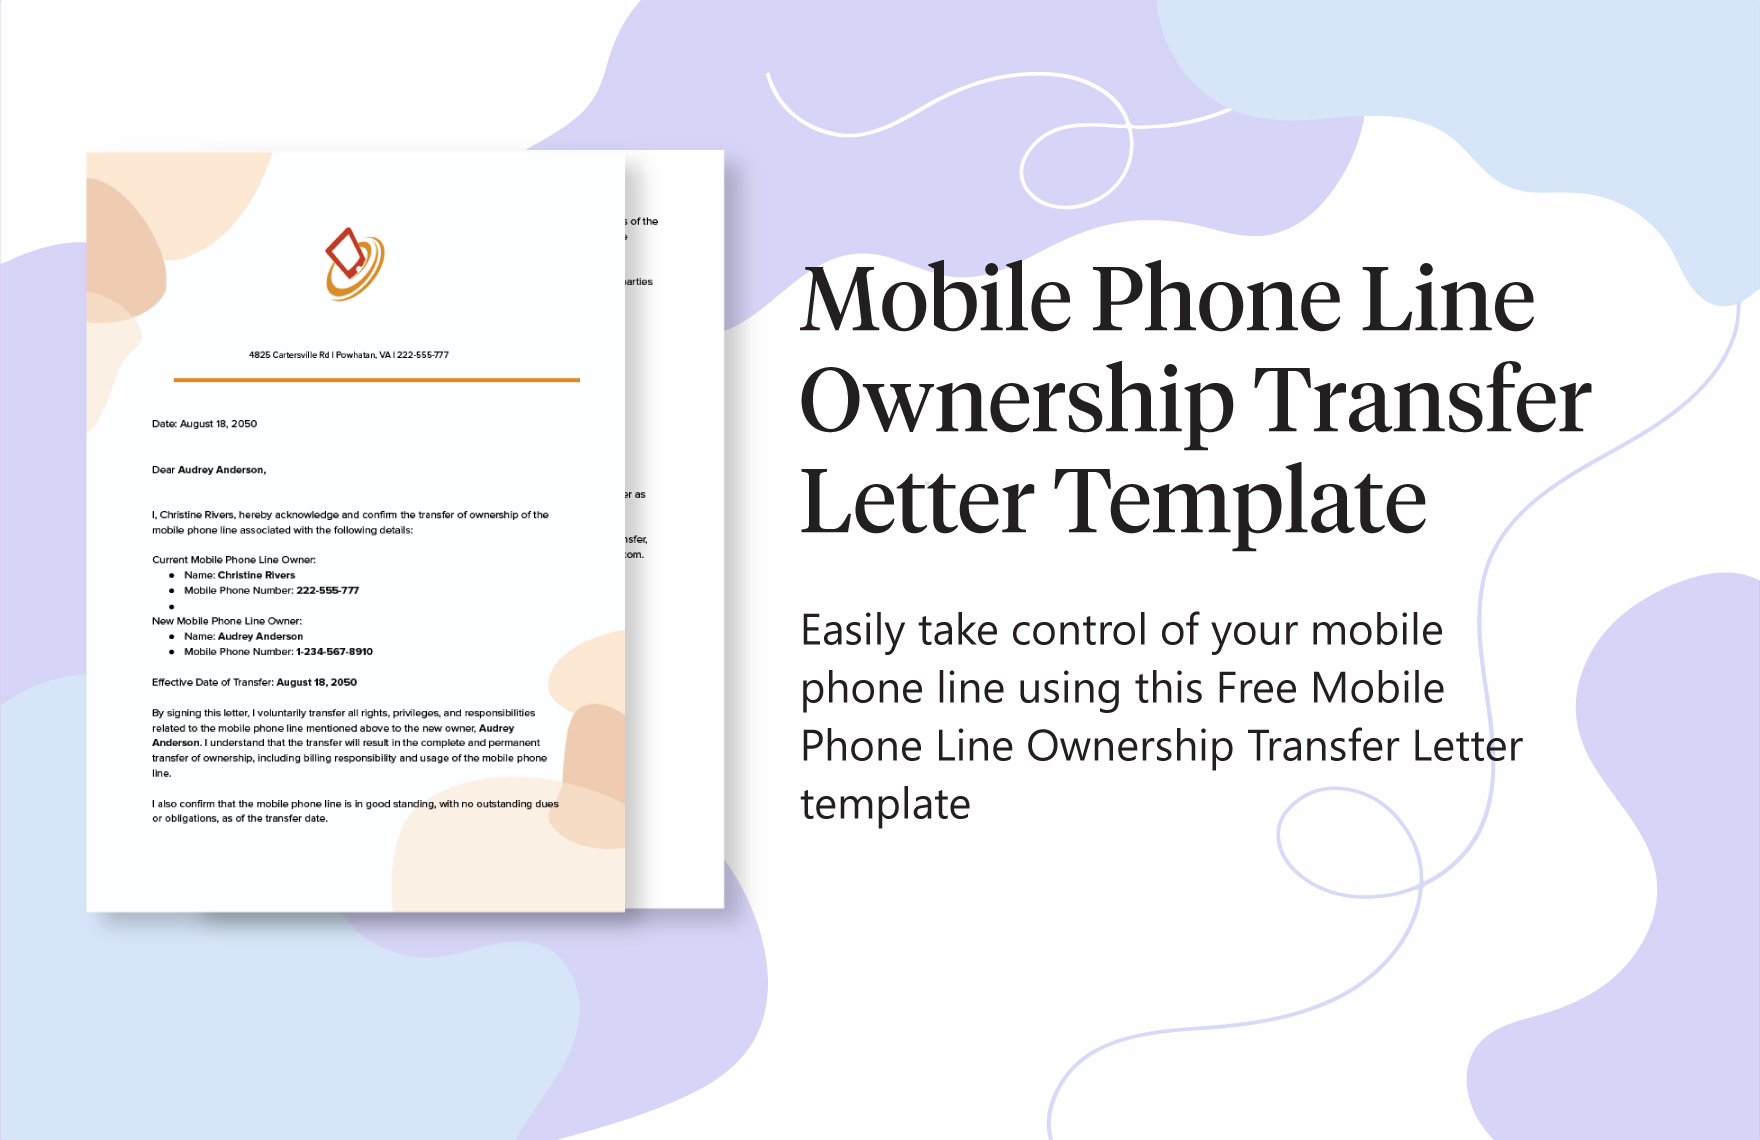 Mobile Phone Line Ownership Transfer Letter Template